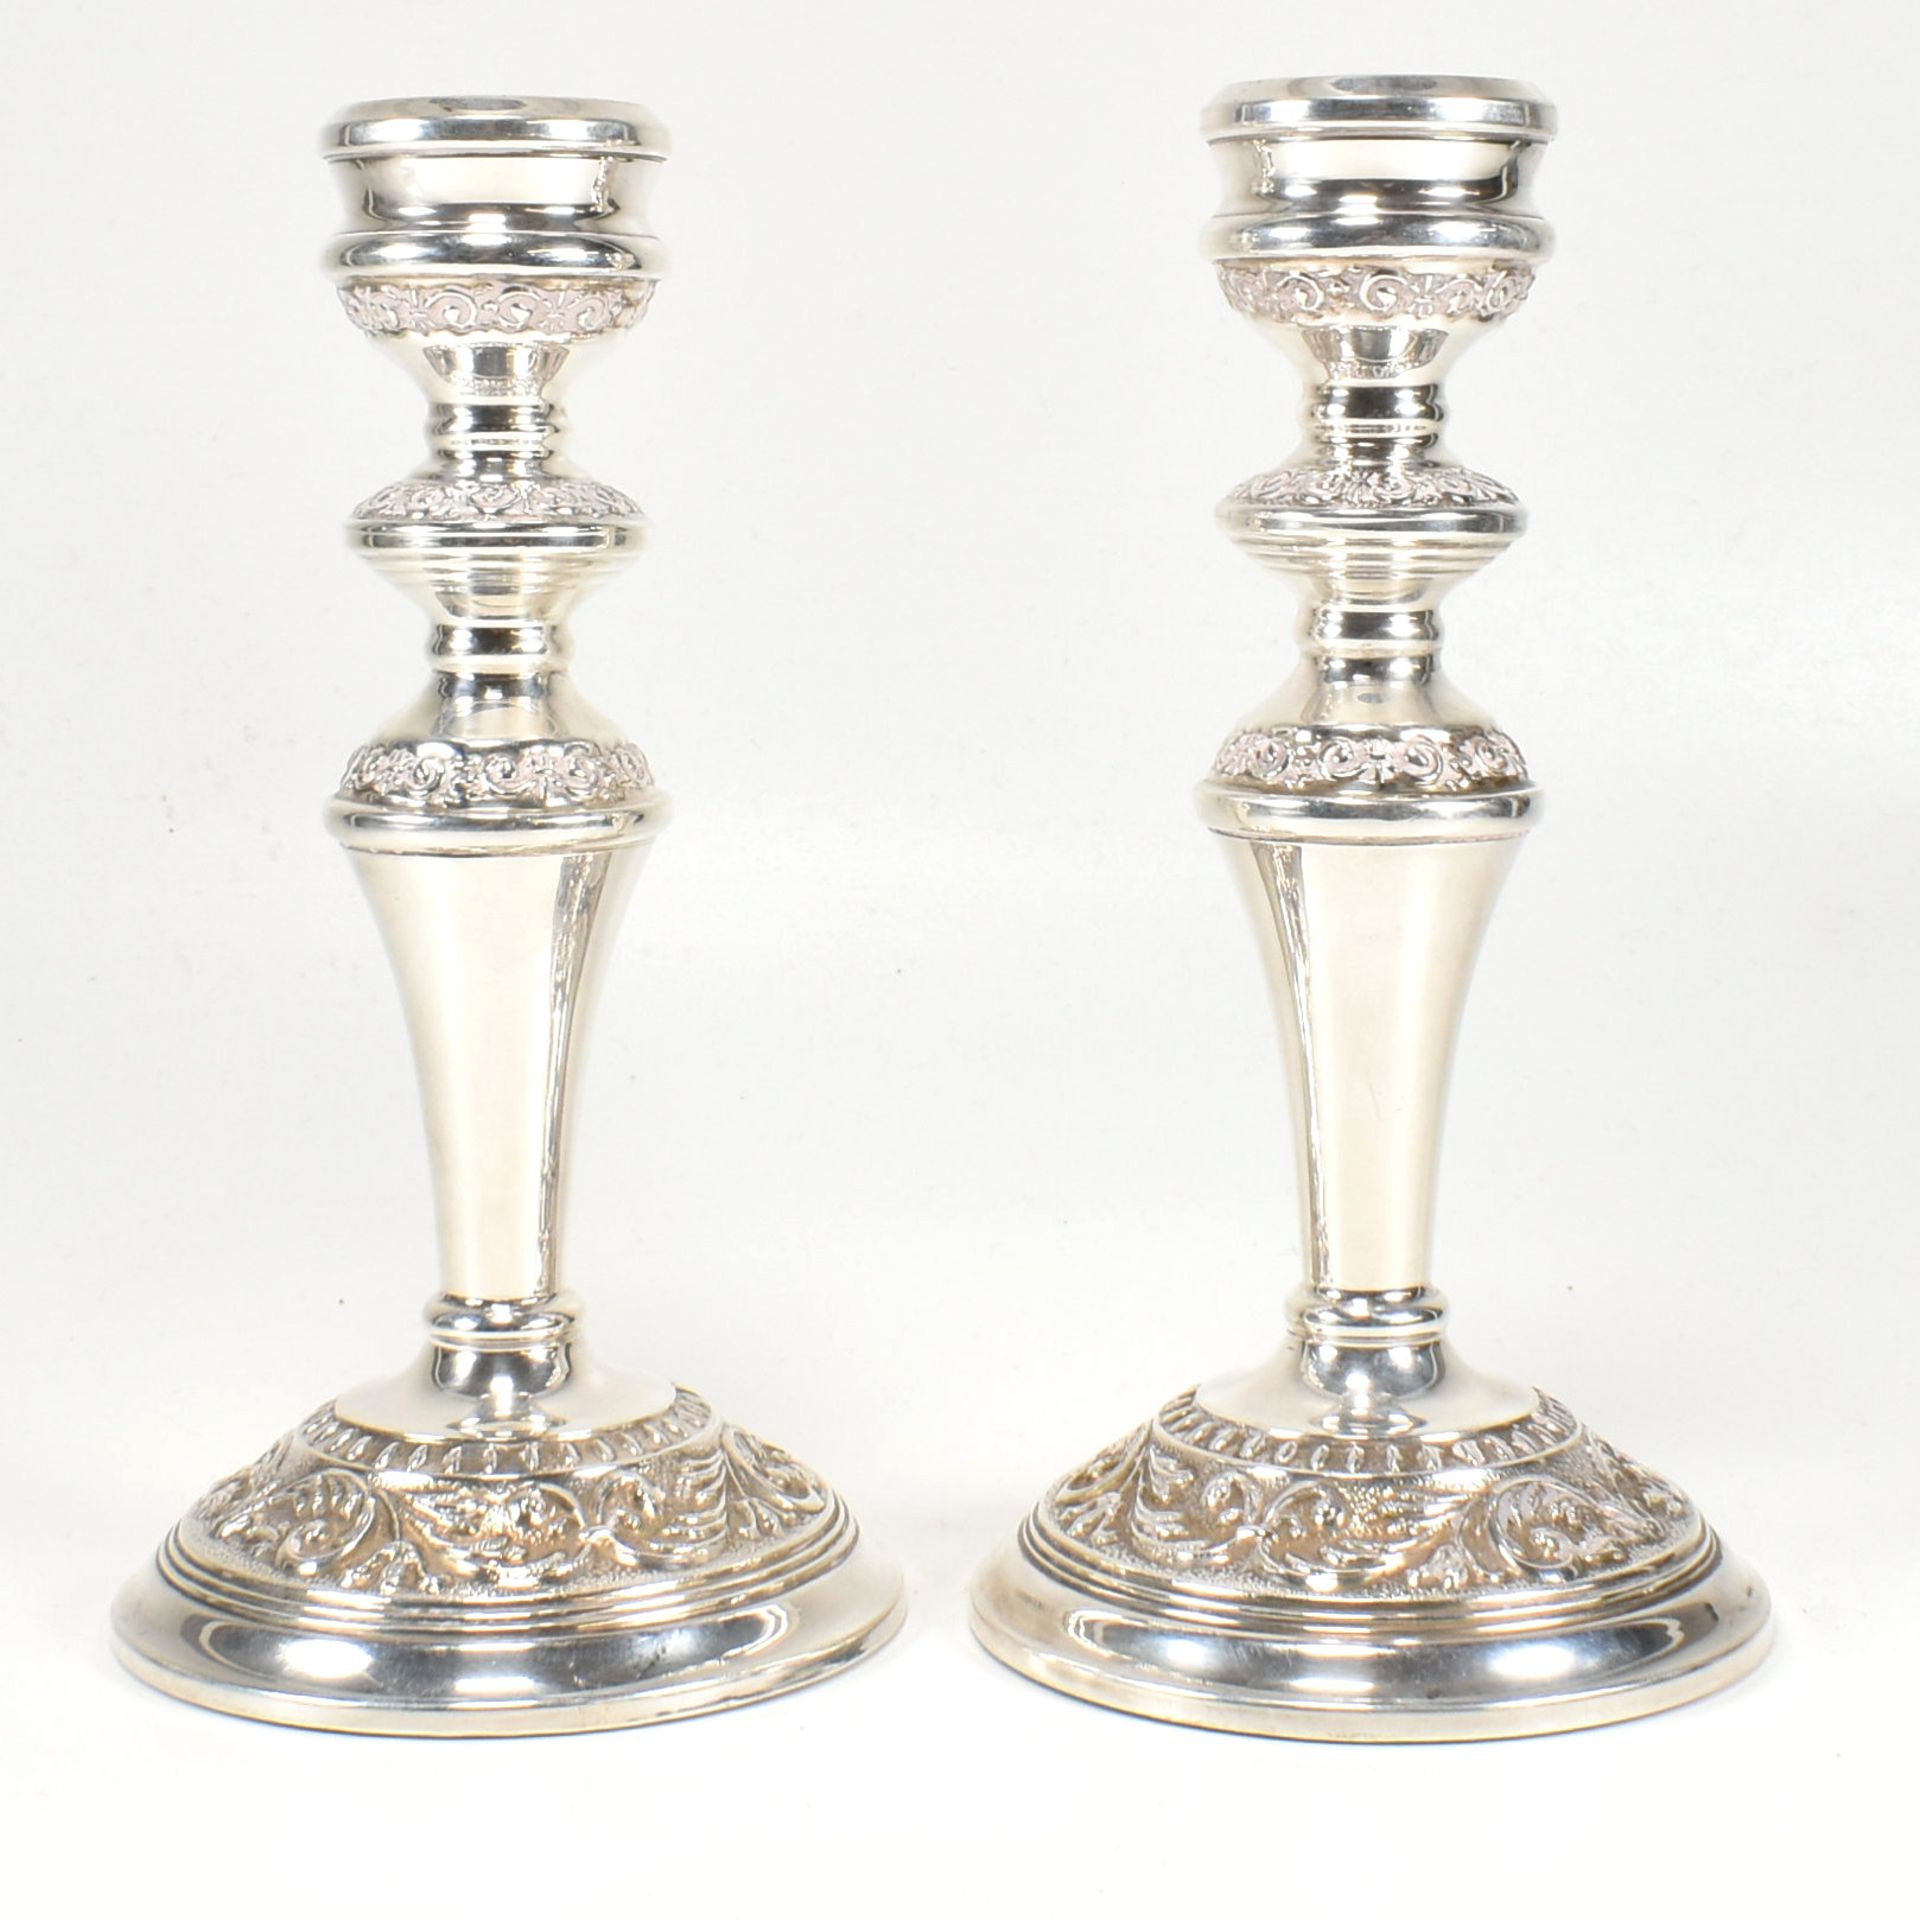 PAIR OF 1970S HALLMARKED SILVER MOUNTED CANDLESTICKS